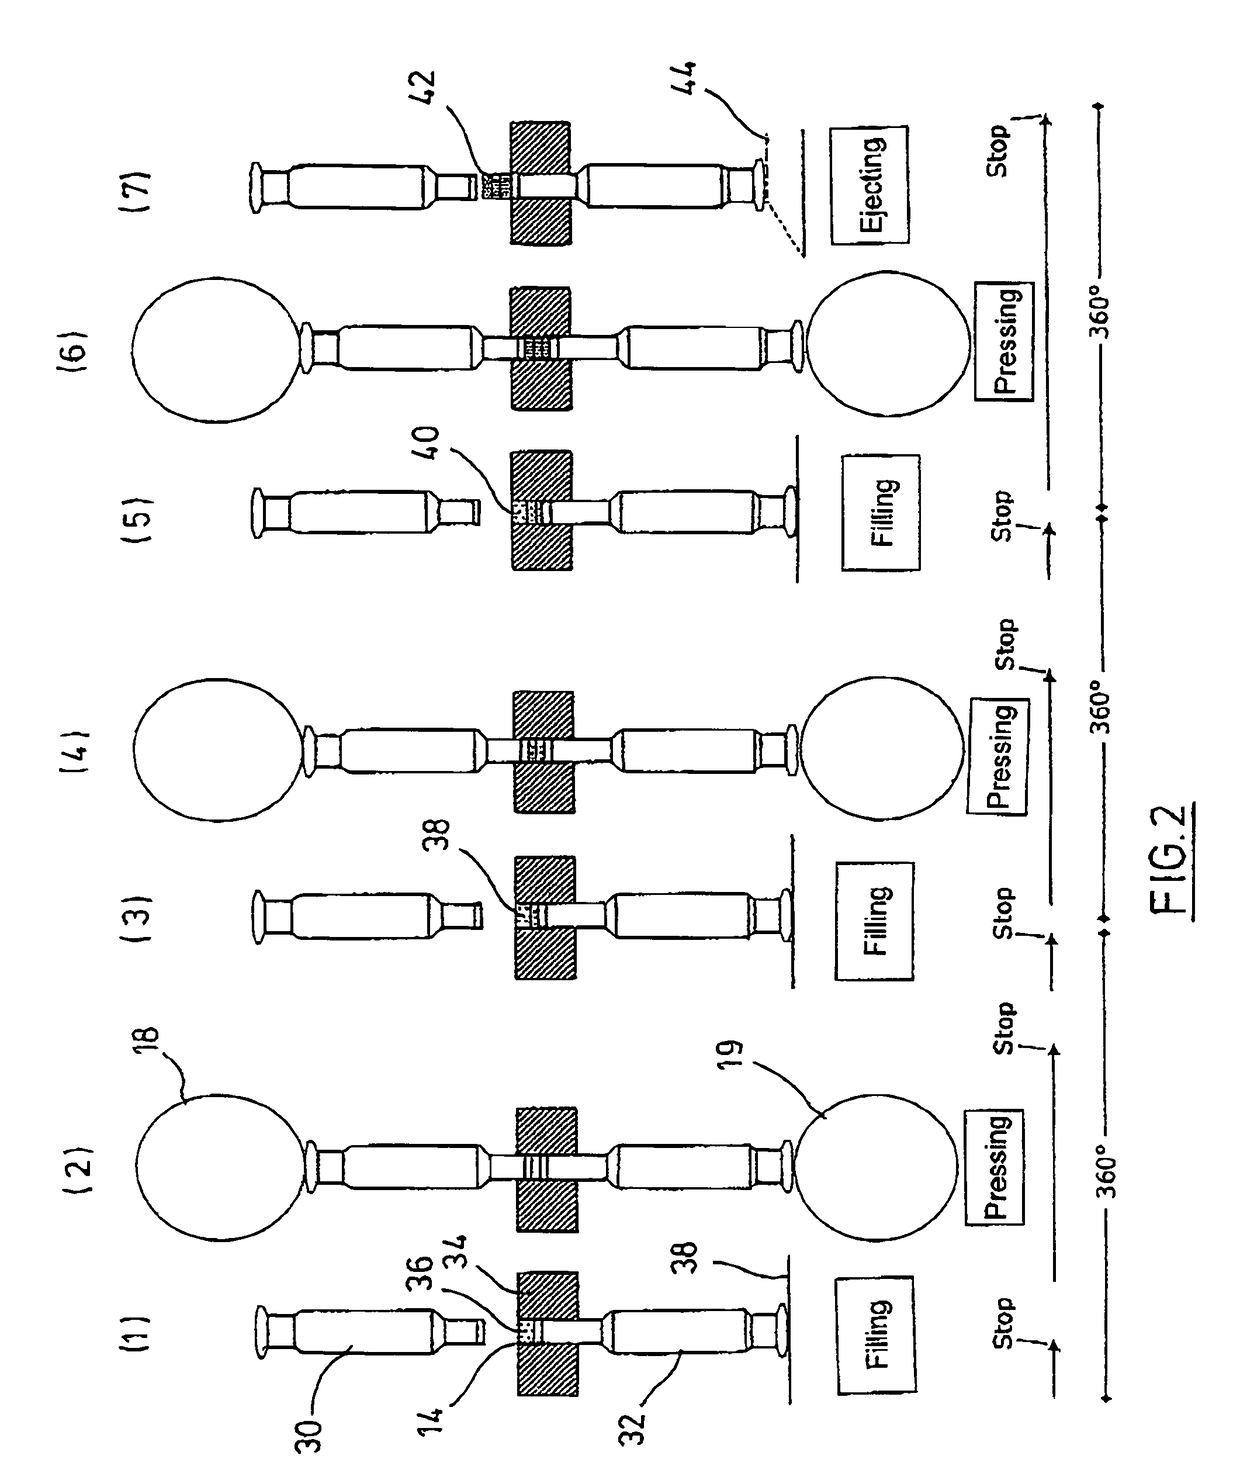 Method and apparatus for test pressing multi-layer tablets or coated tablets